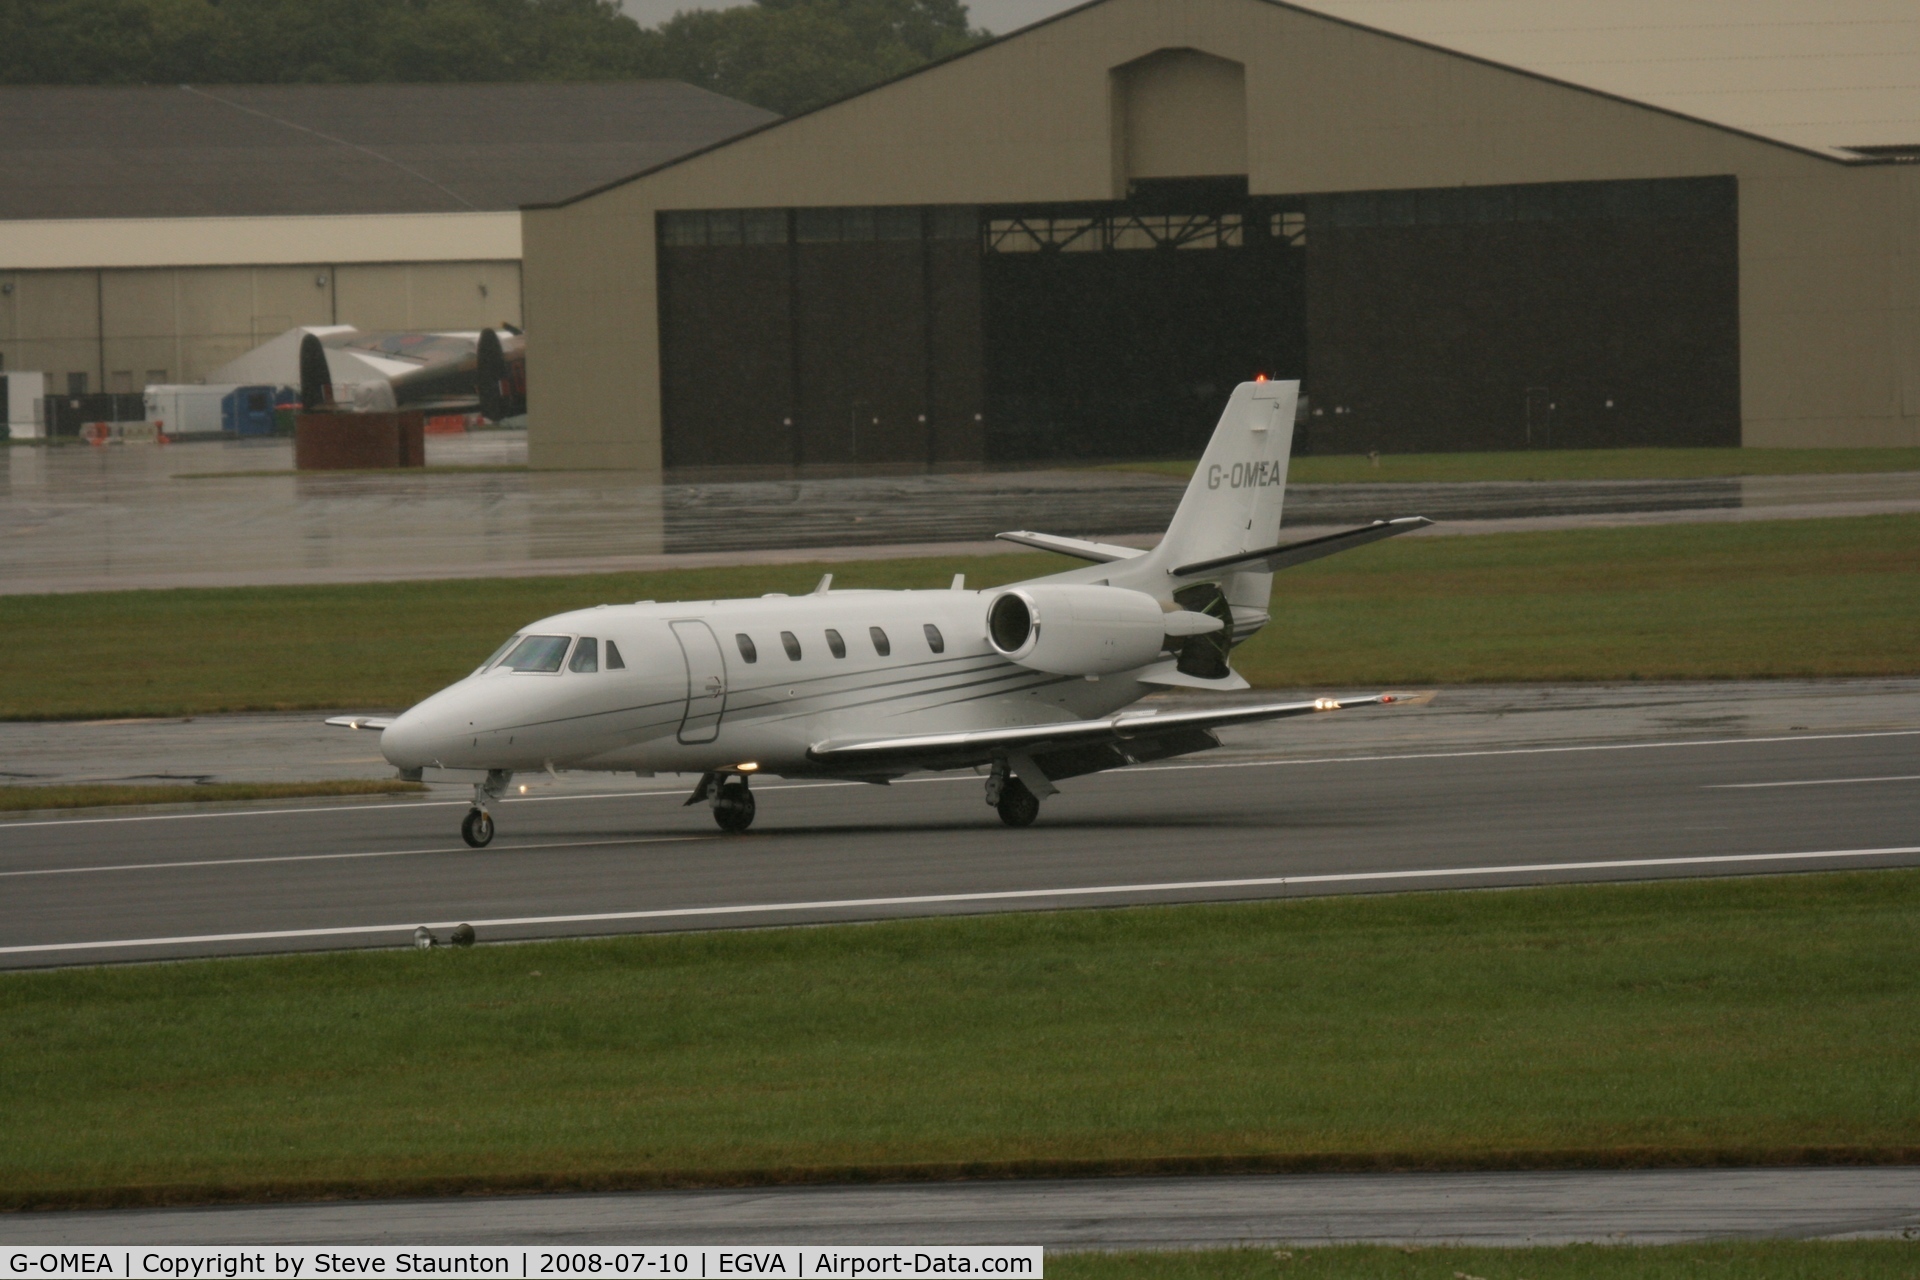 G-OMEA, 2006 Cessna 560XL Citation XLS C/N 560-5610, Taken at the Royal International Air Tattoo 2008 during arrivals and departures (show days cancelled due to bad weather)